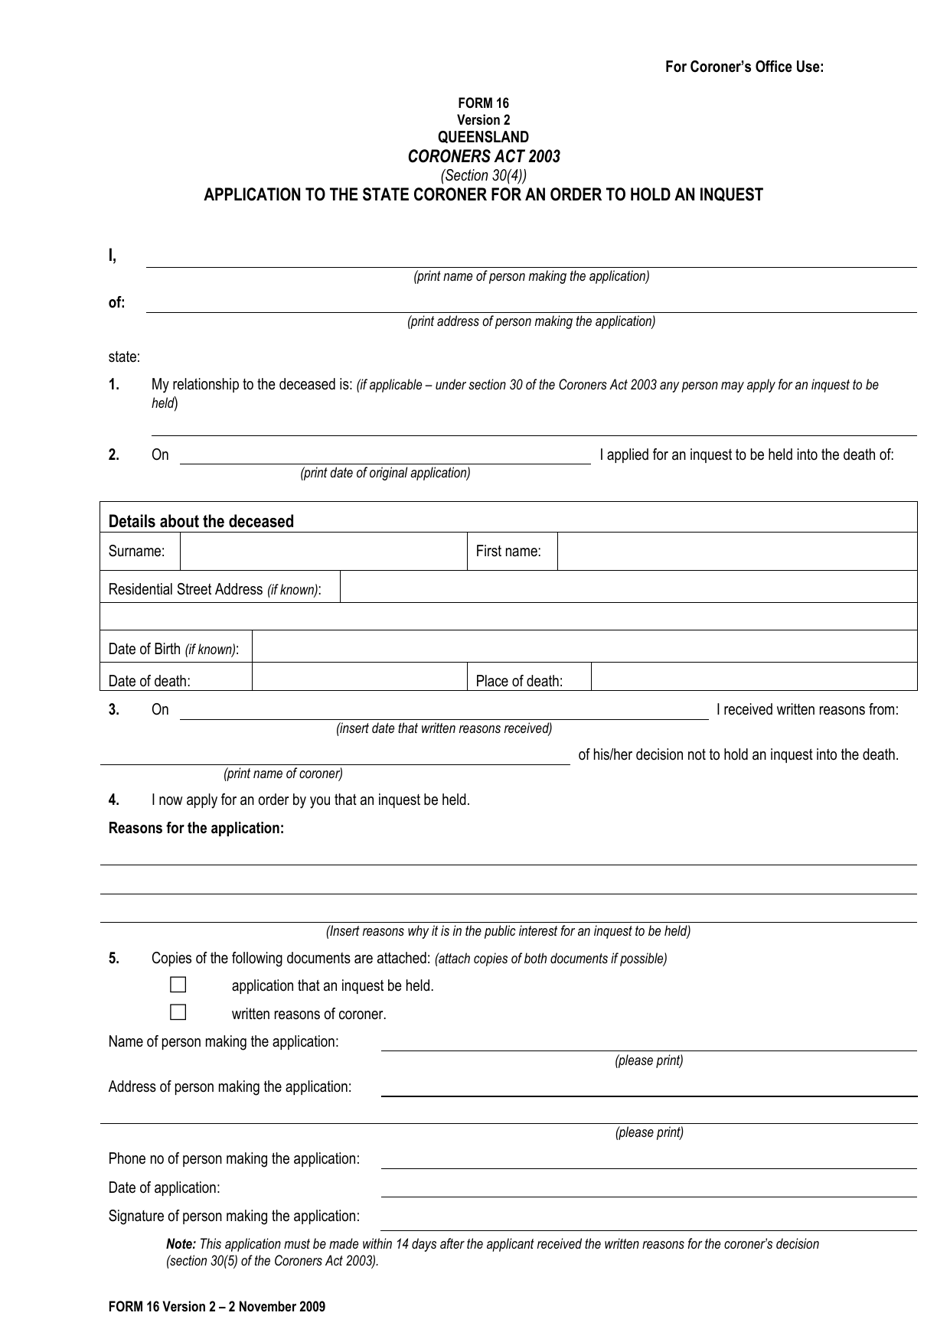 Form 16 Application to the State Coroner for an Order to Hold an Inquest - Queensland, Australia, Page 1